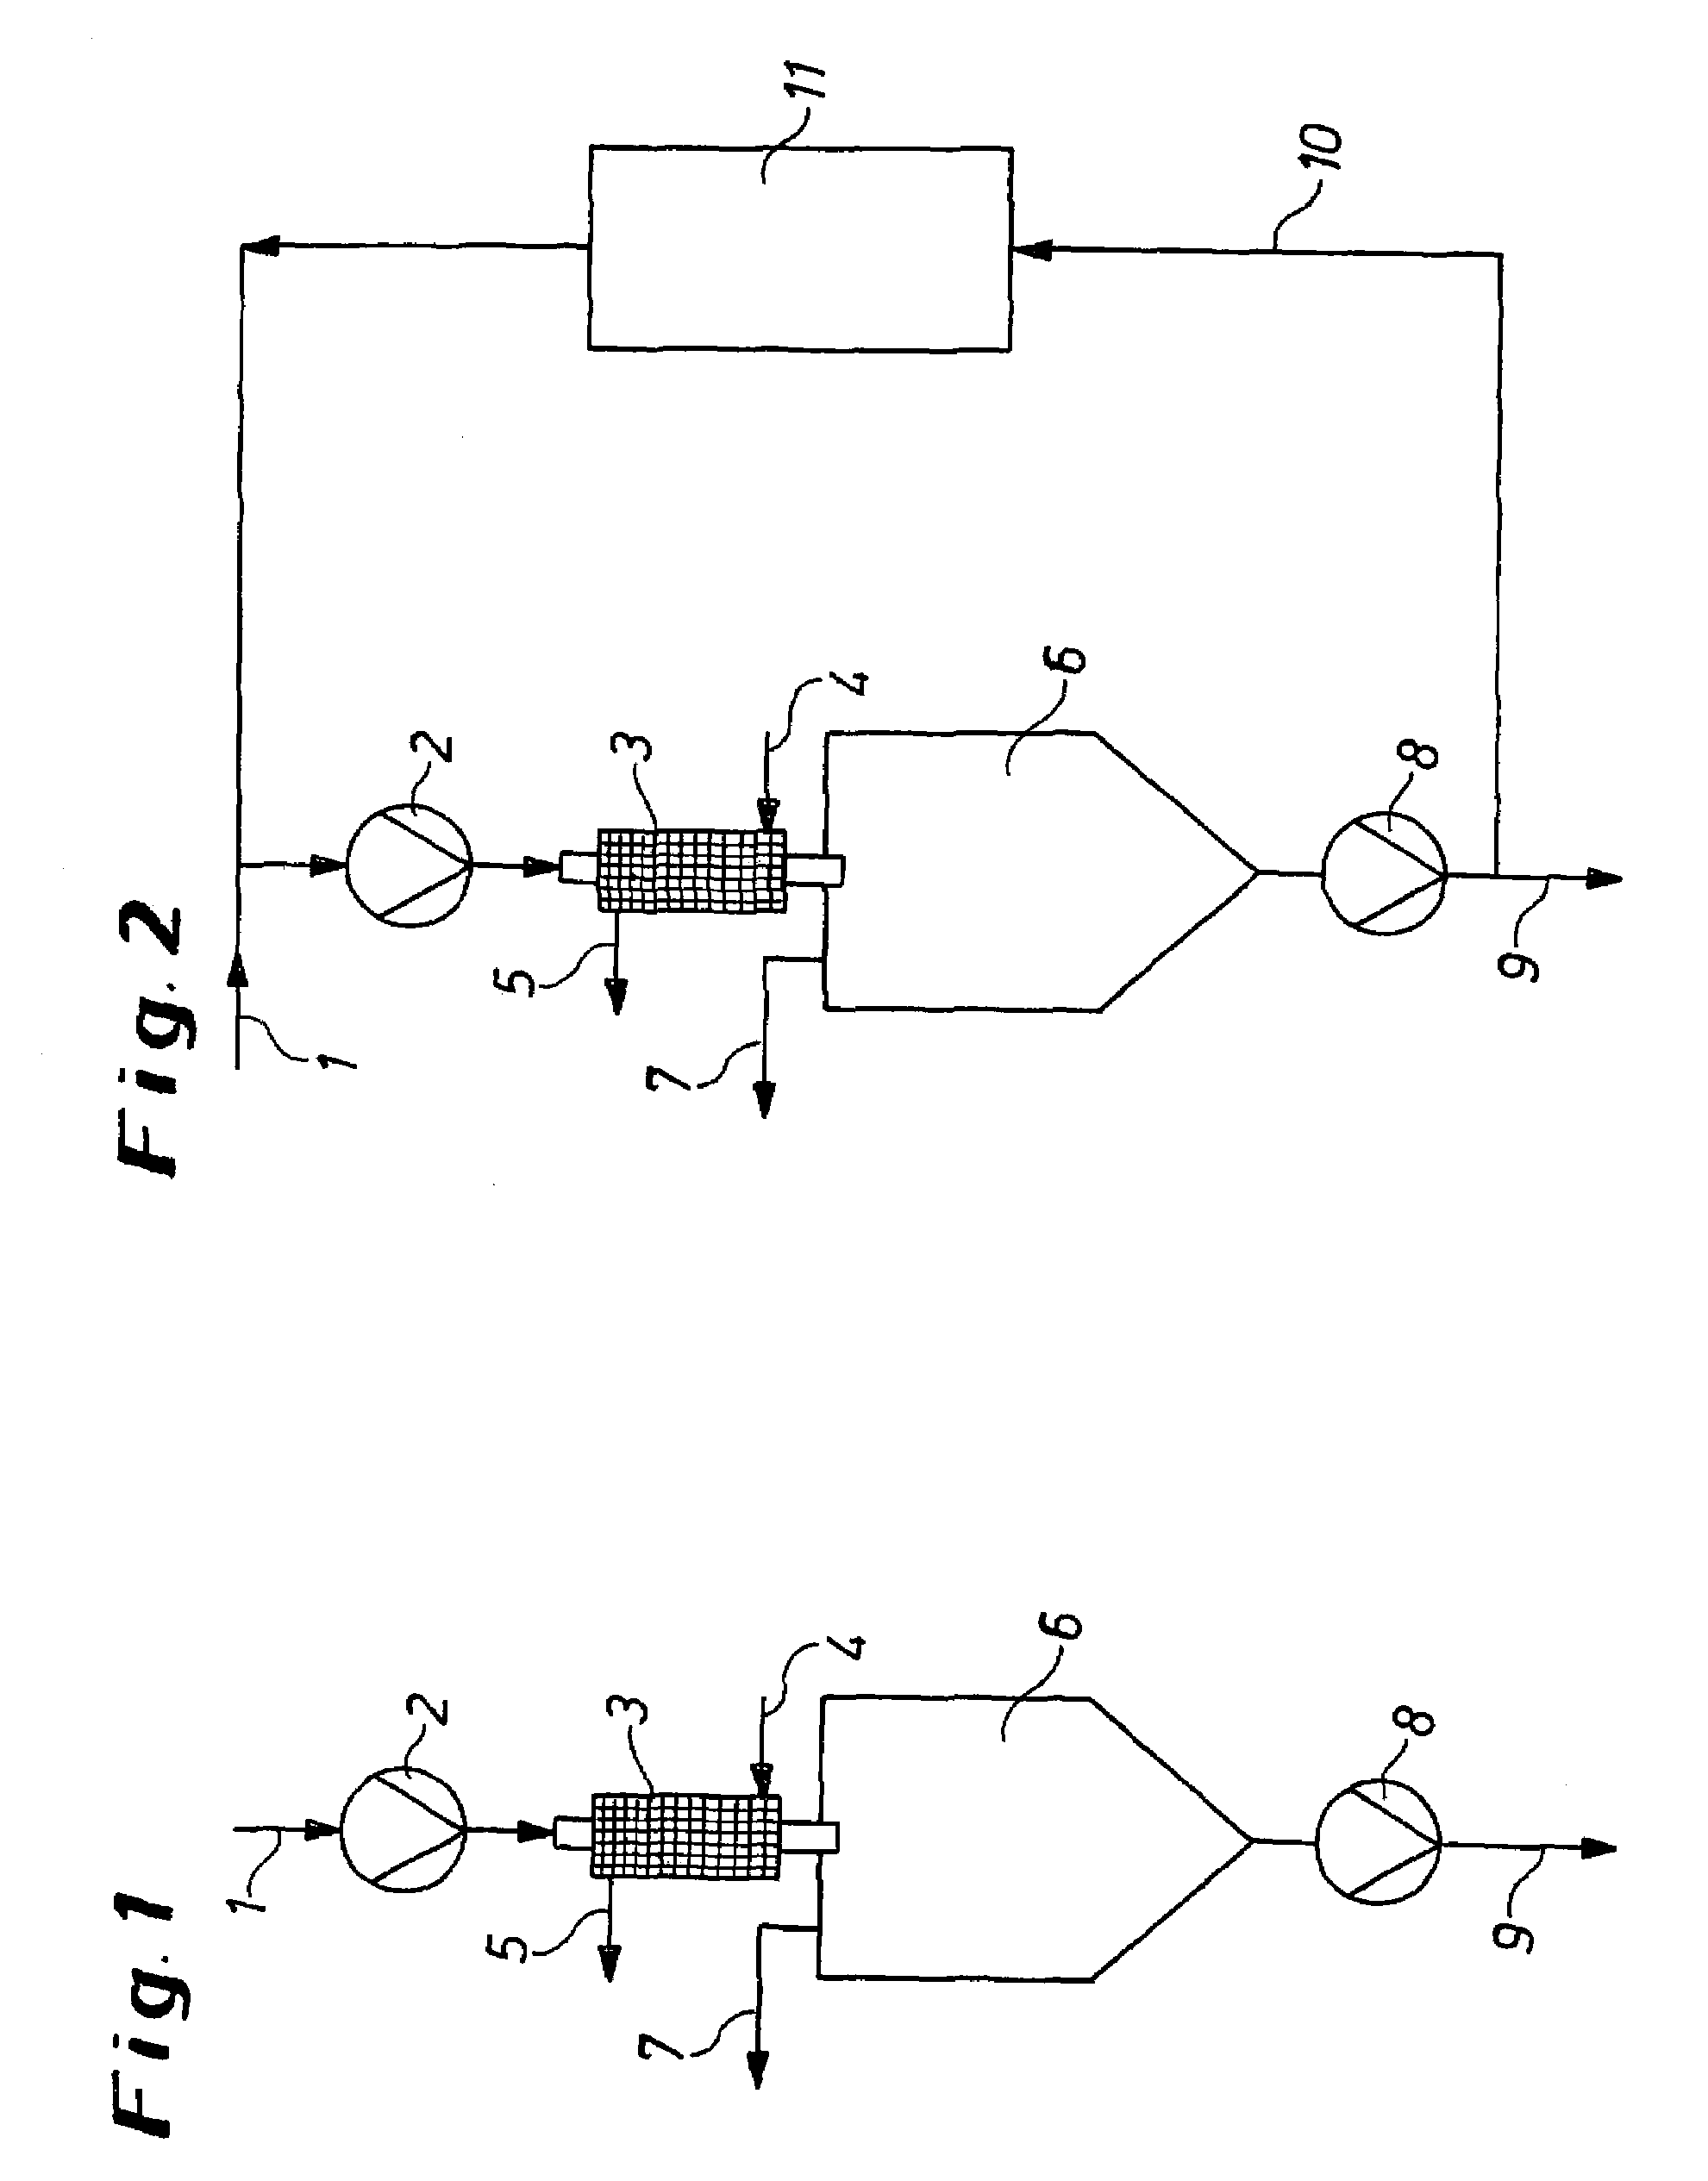 Process for the removal of volatile compounds from mixtures of substances using a micro-evaporator